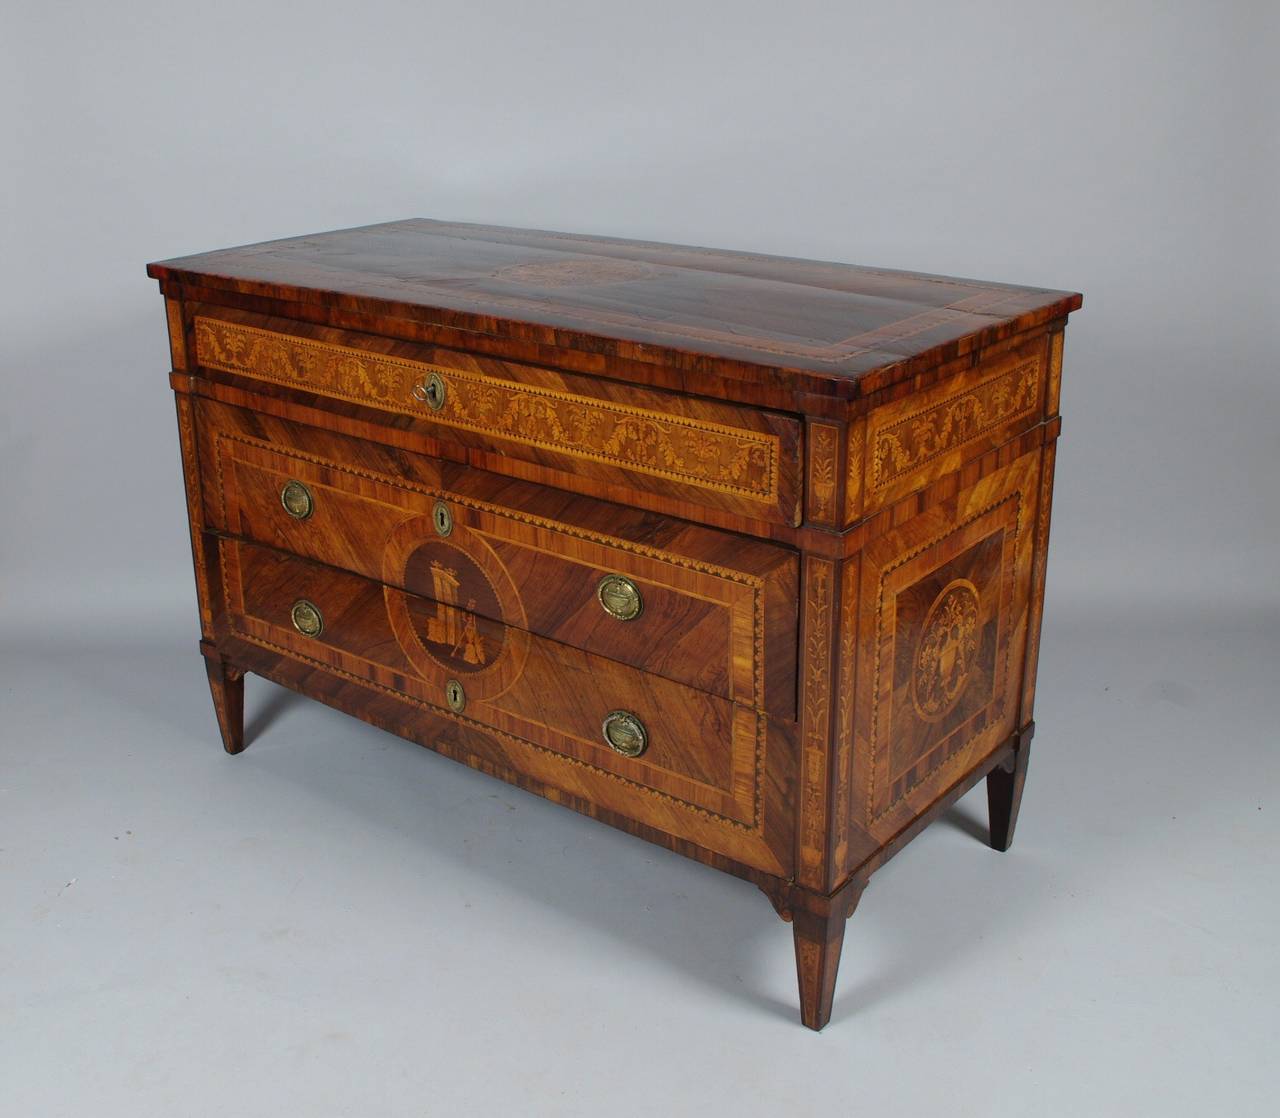 Fine Milanese marquetry commode attributed to Gaspare Basanni, the rectangular top of quarter matched rosewood veneers with tulipwood and acanthus crossbanding, centered by an elaborate leaf and foliate medallion; the upper drawer with running